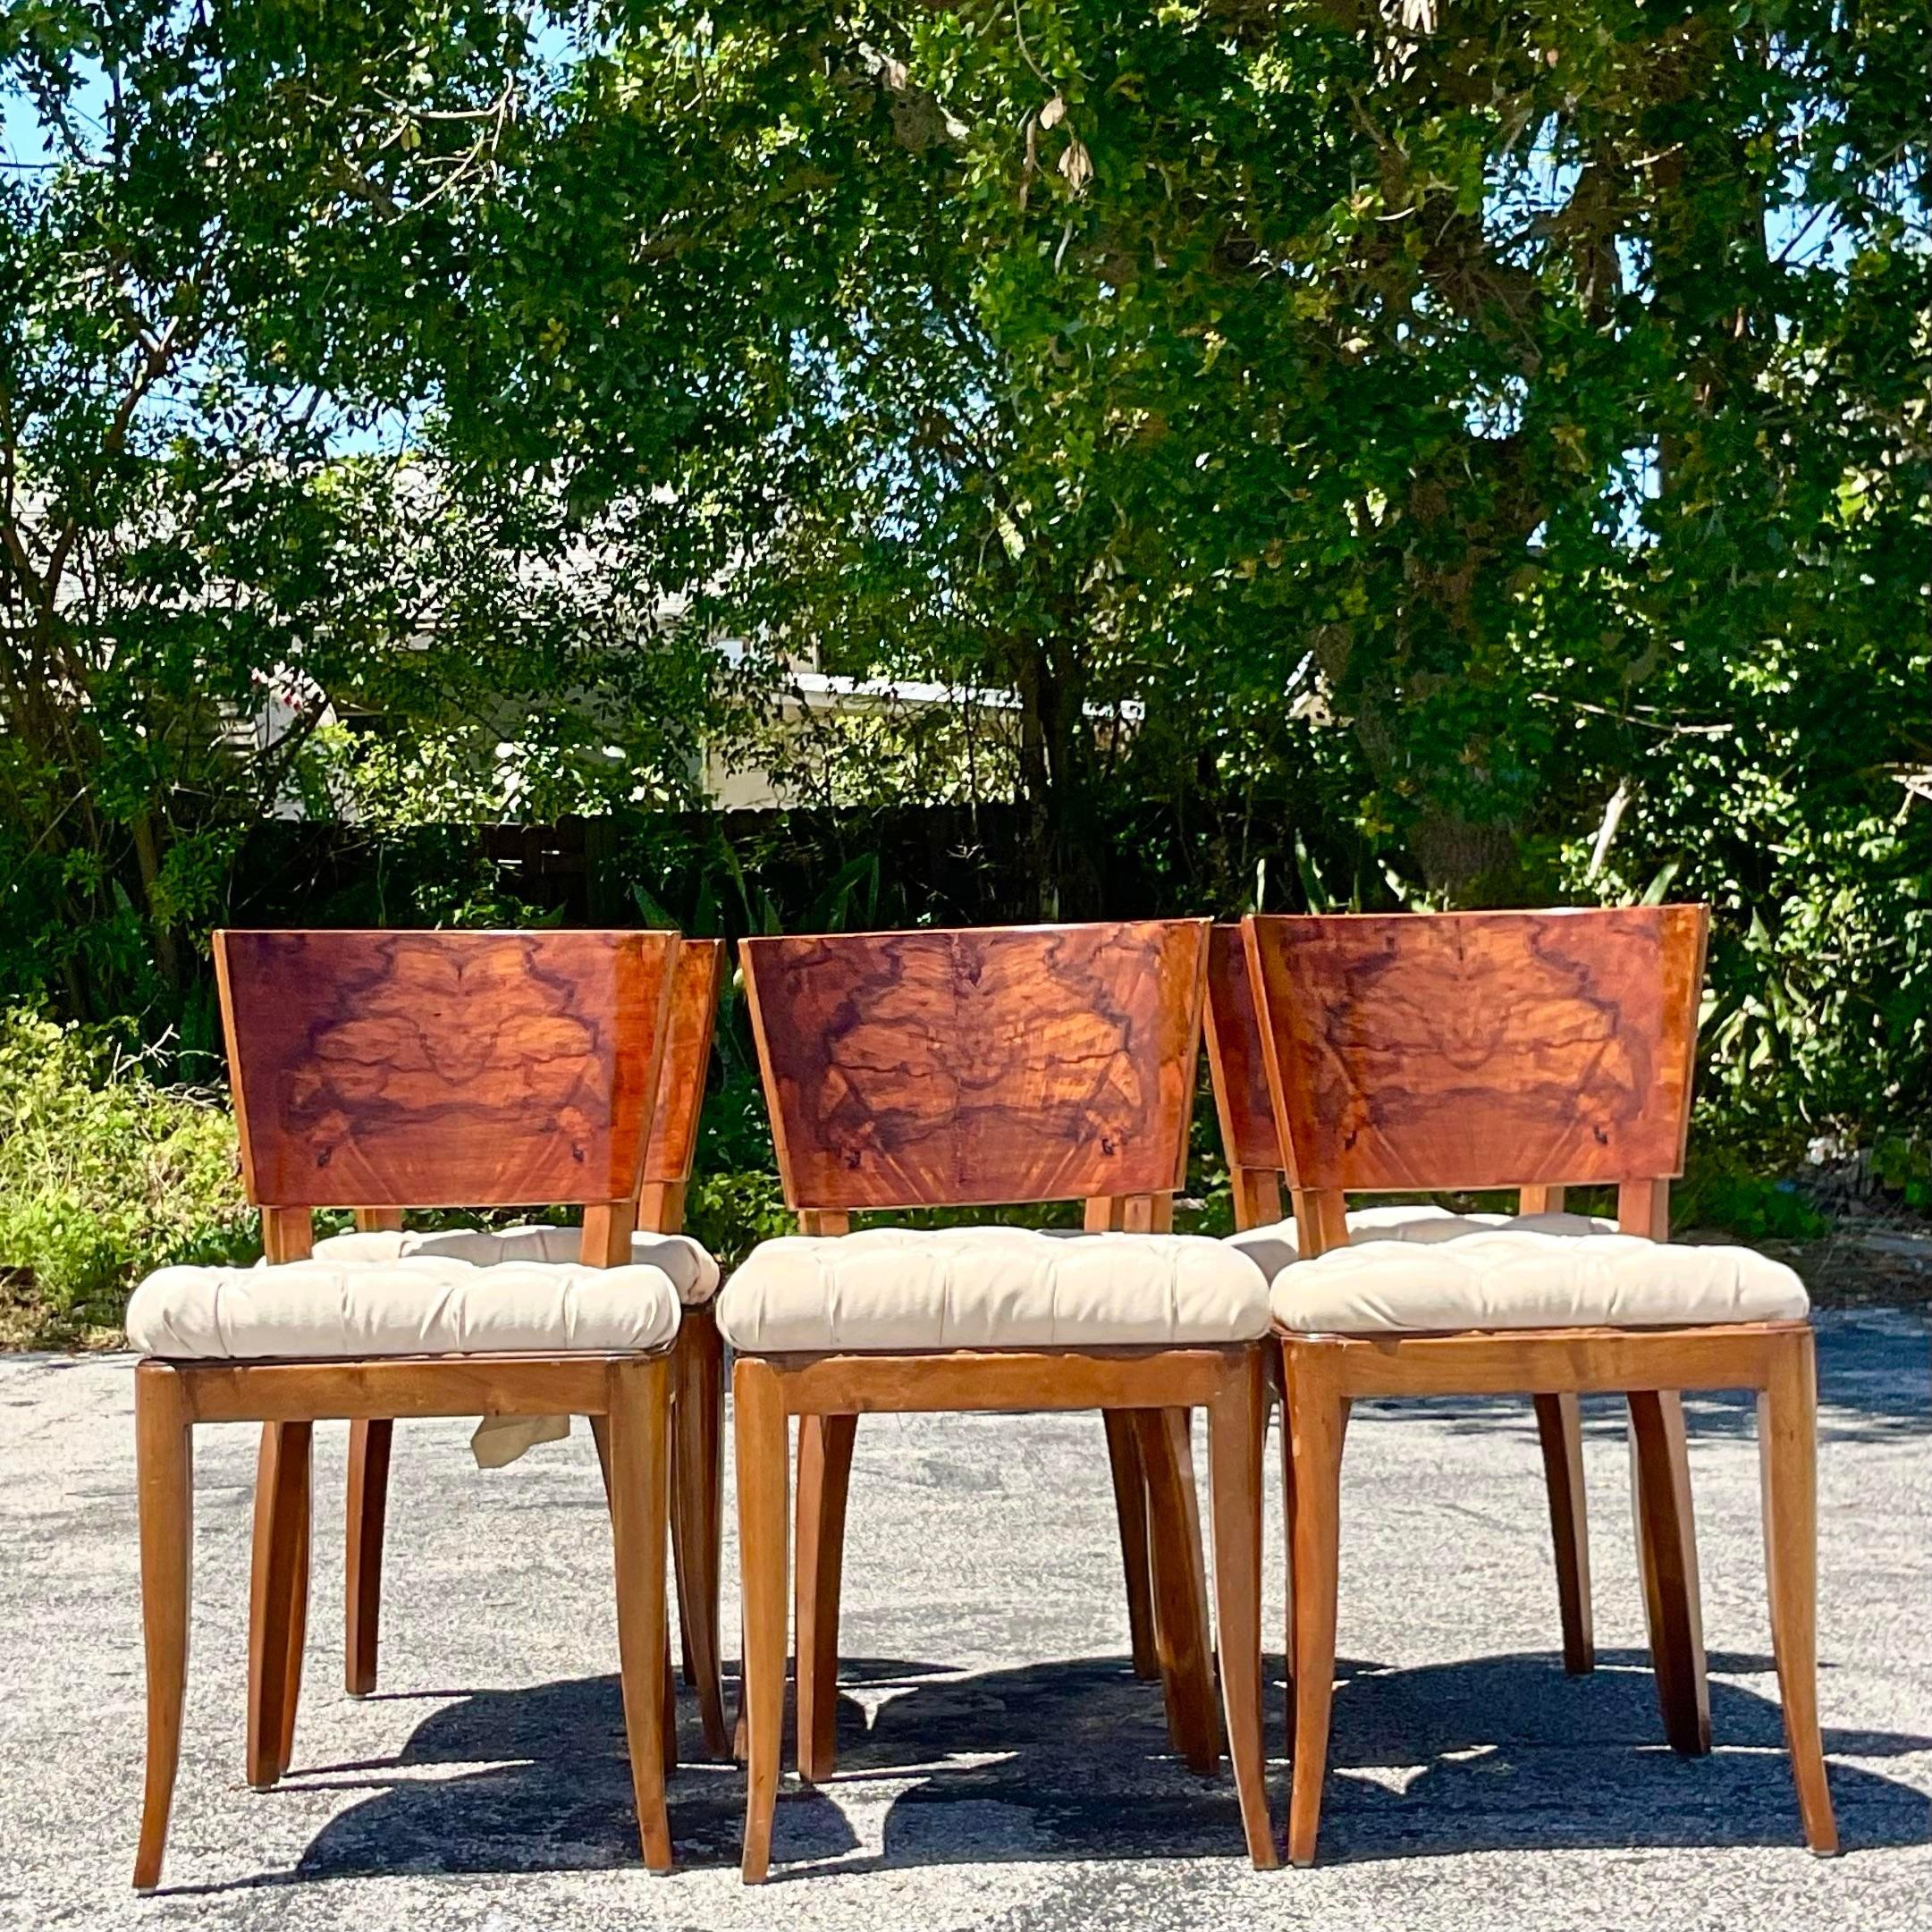 A stunning set of six vintage Deco dining chairs. Gorgeous Burl wood backs with incredible wood grain detail. Chic tufted flax seats in great condition. Acquired from a Palm Beach estate.